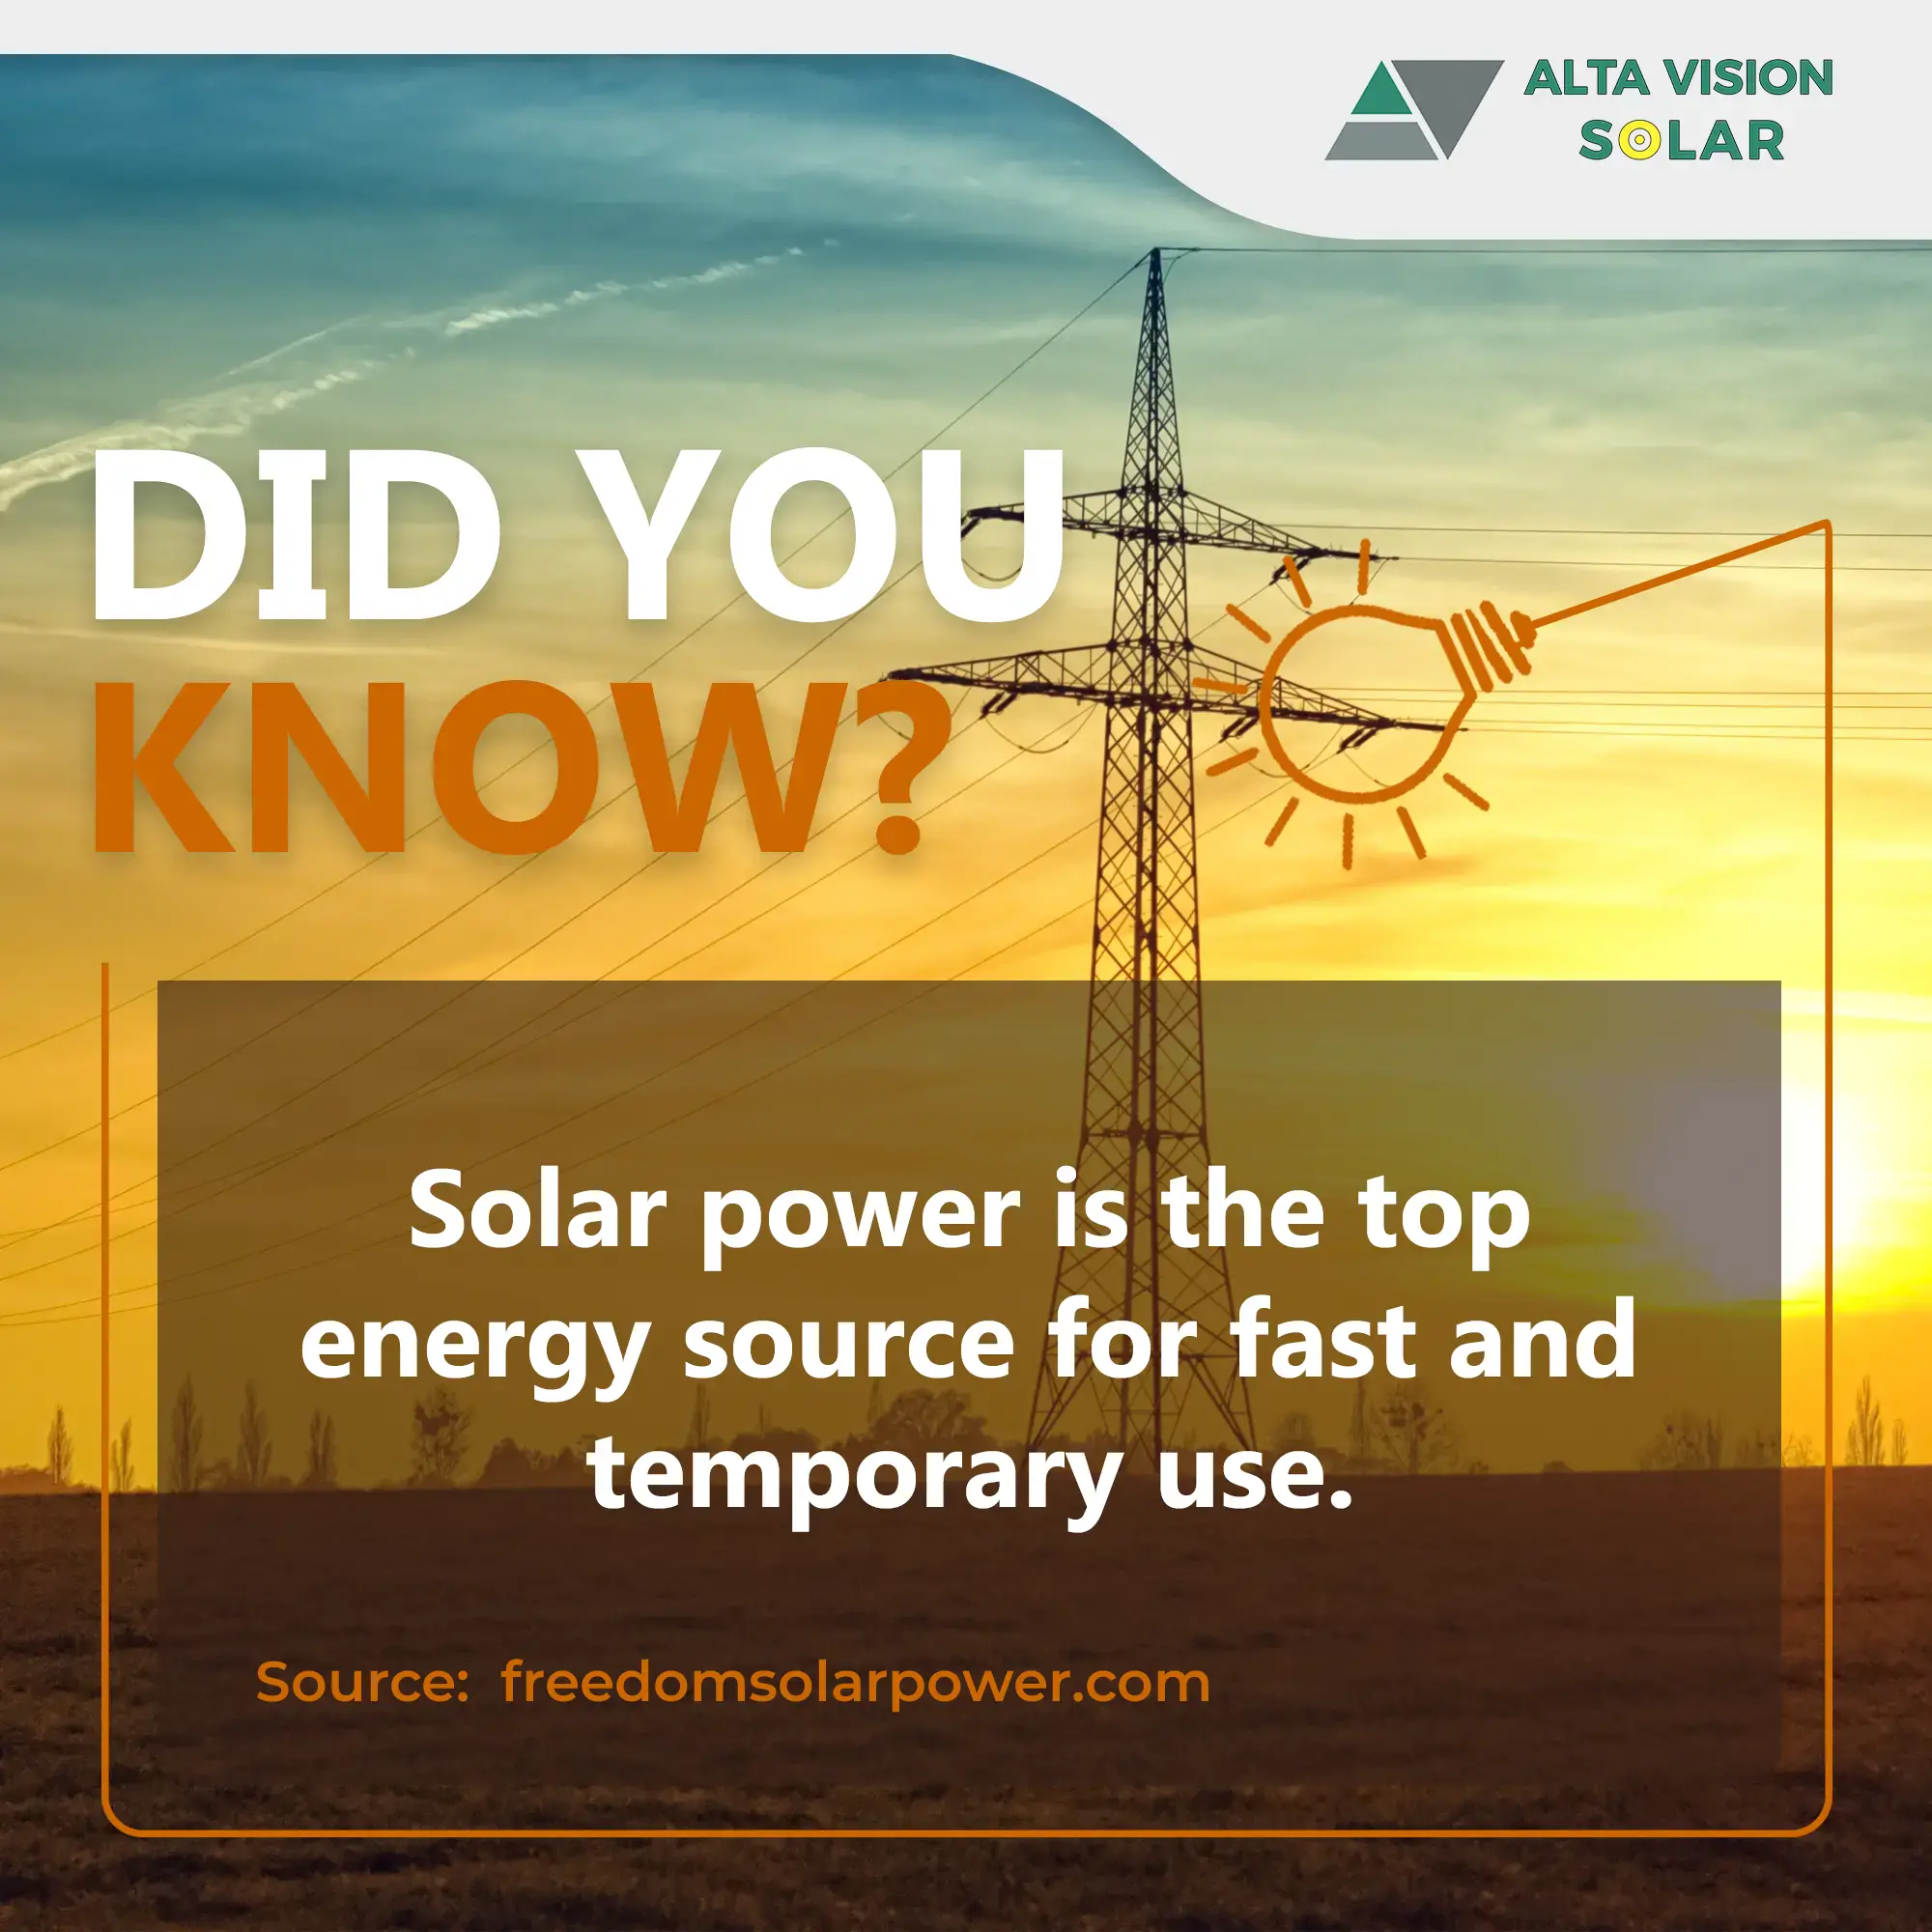 Solar power is the top energy source for fast and temporary use